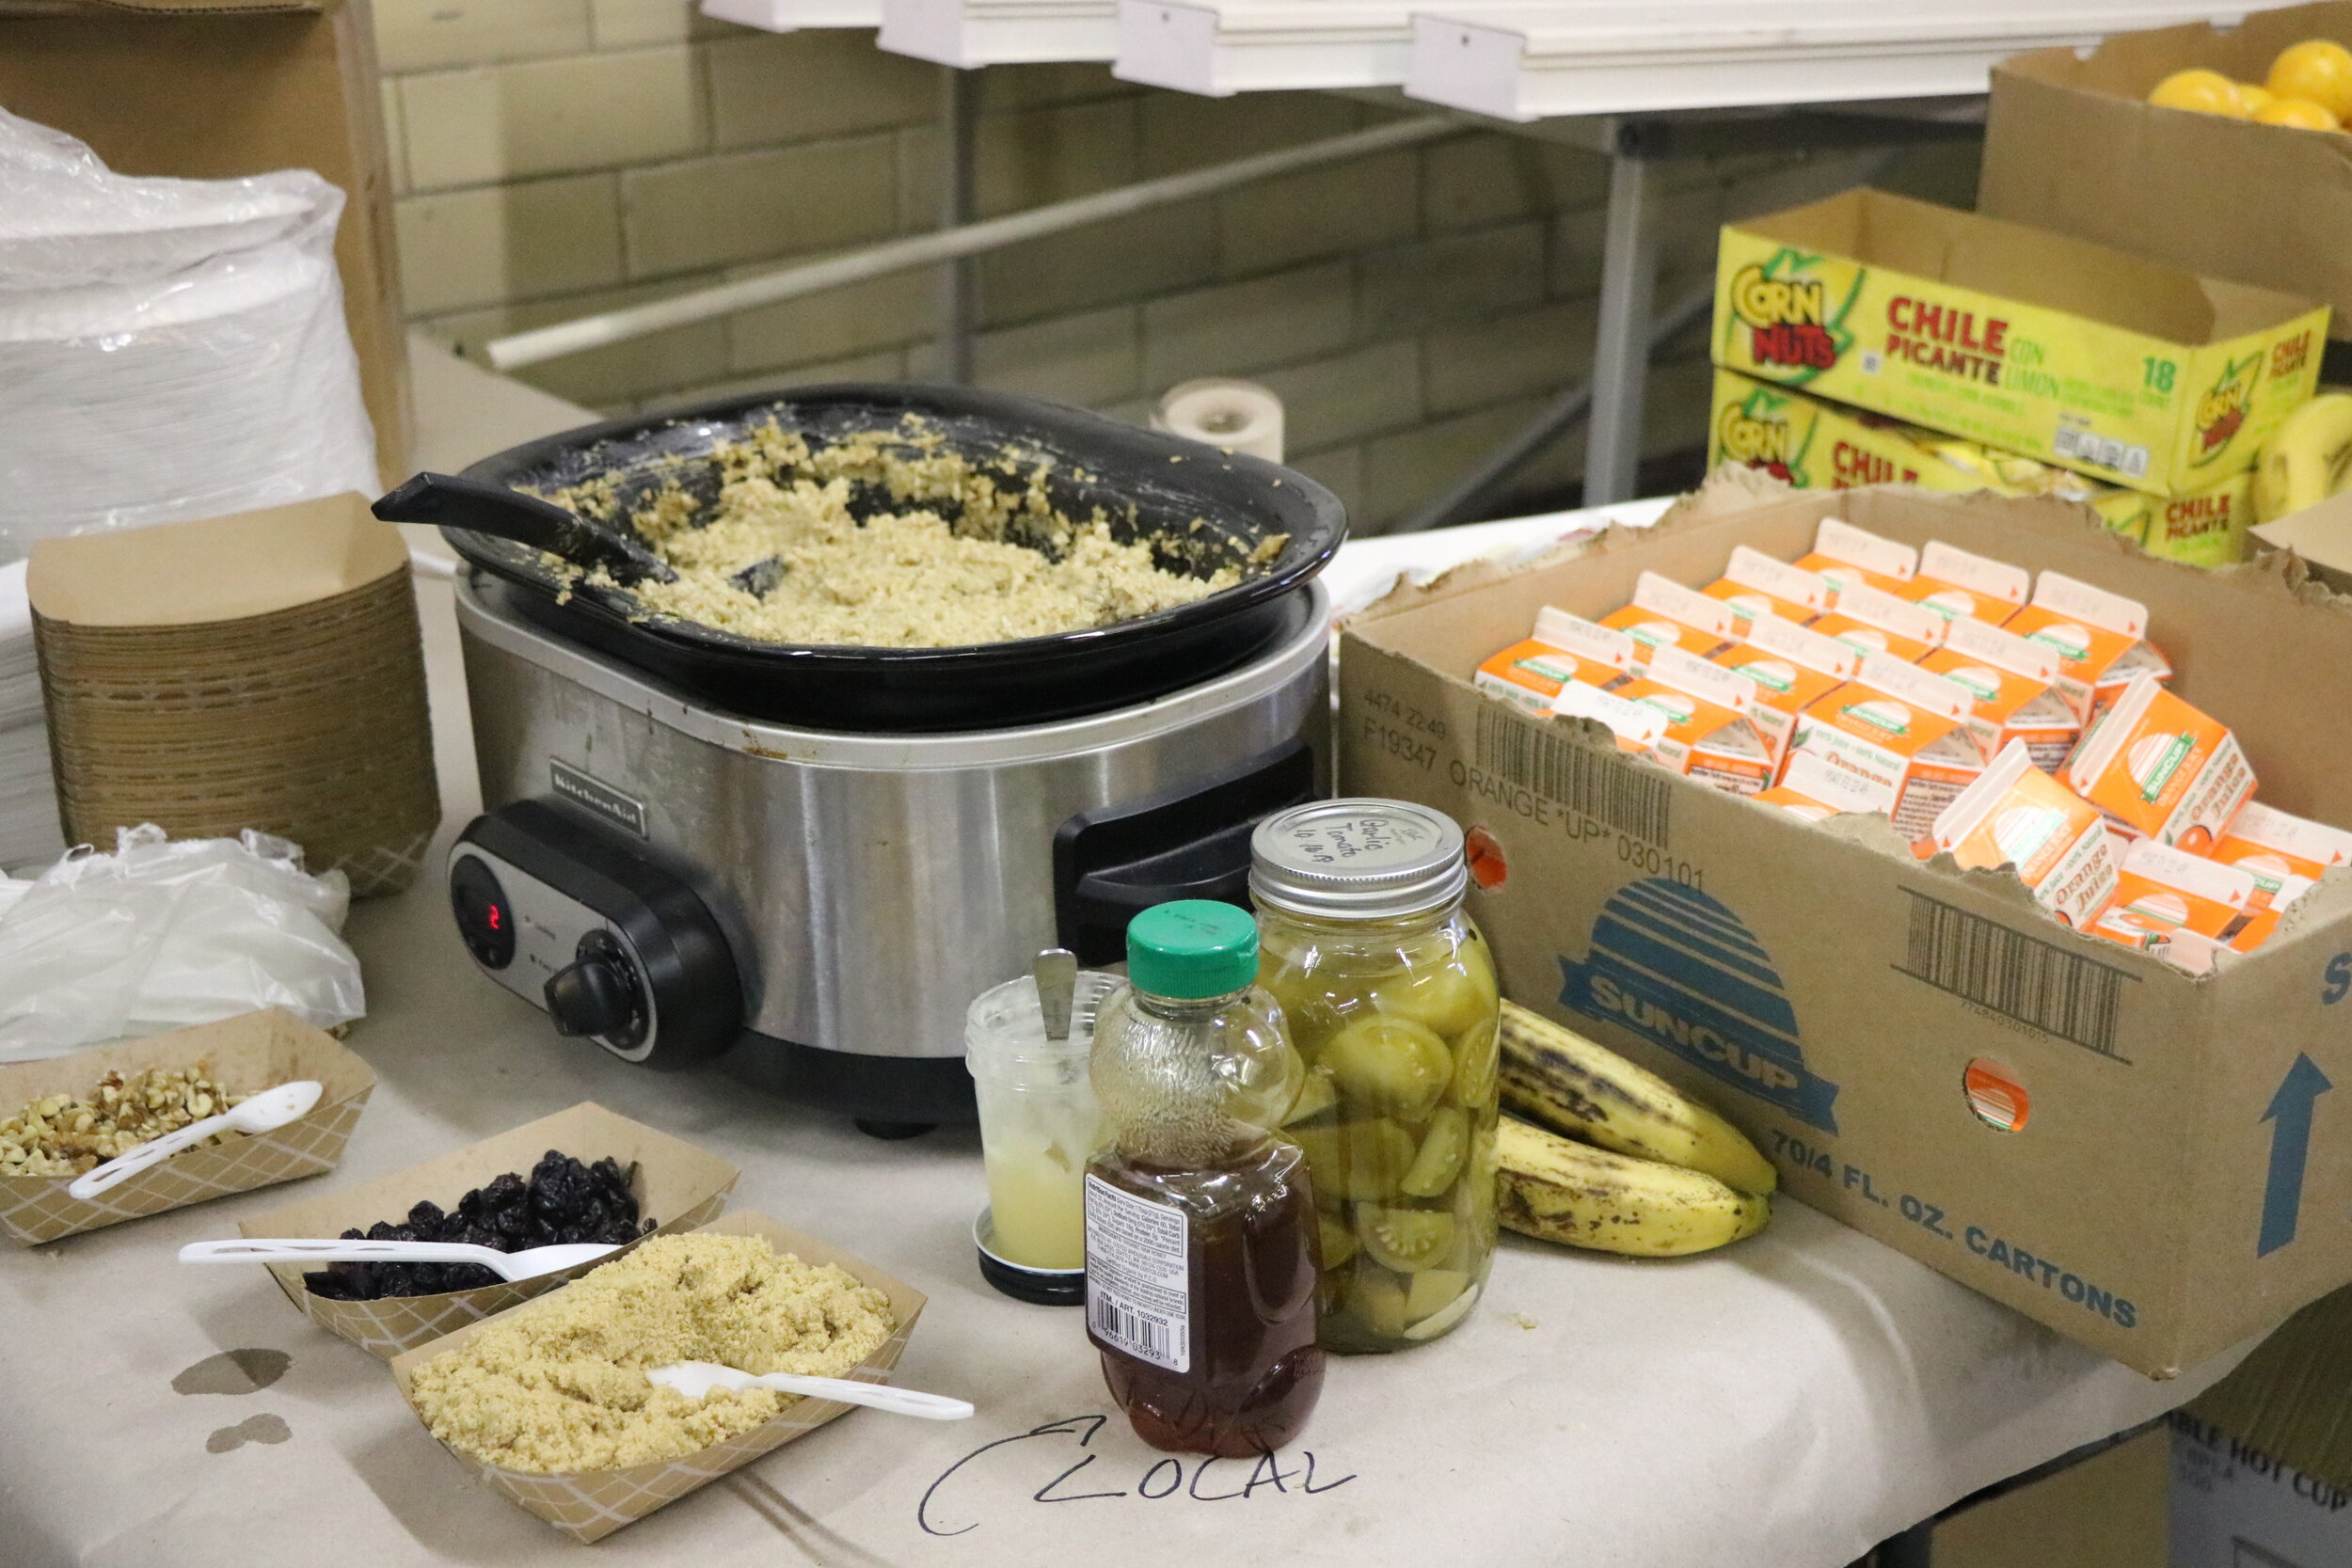  Many of the food and beverage options available at the summit vegan as well as fruit- and plant-based. People were also encouraged to bring their own homemade goods to share. 